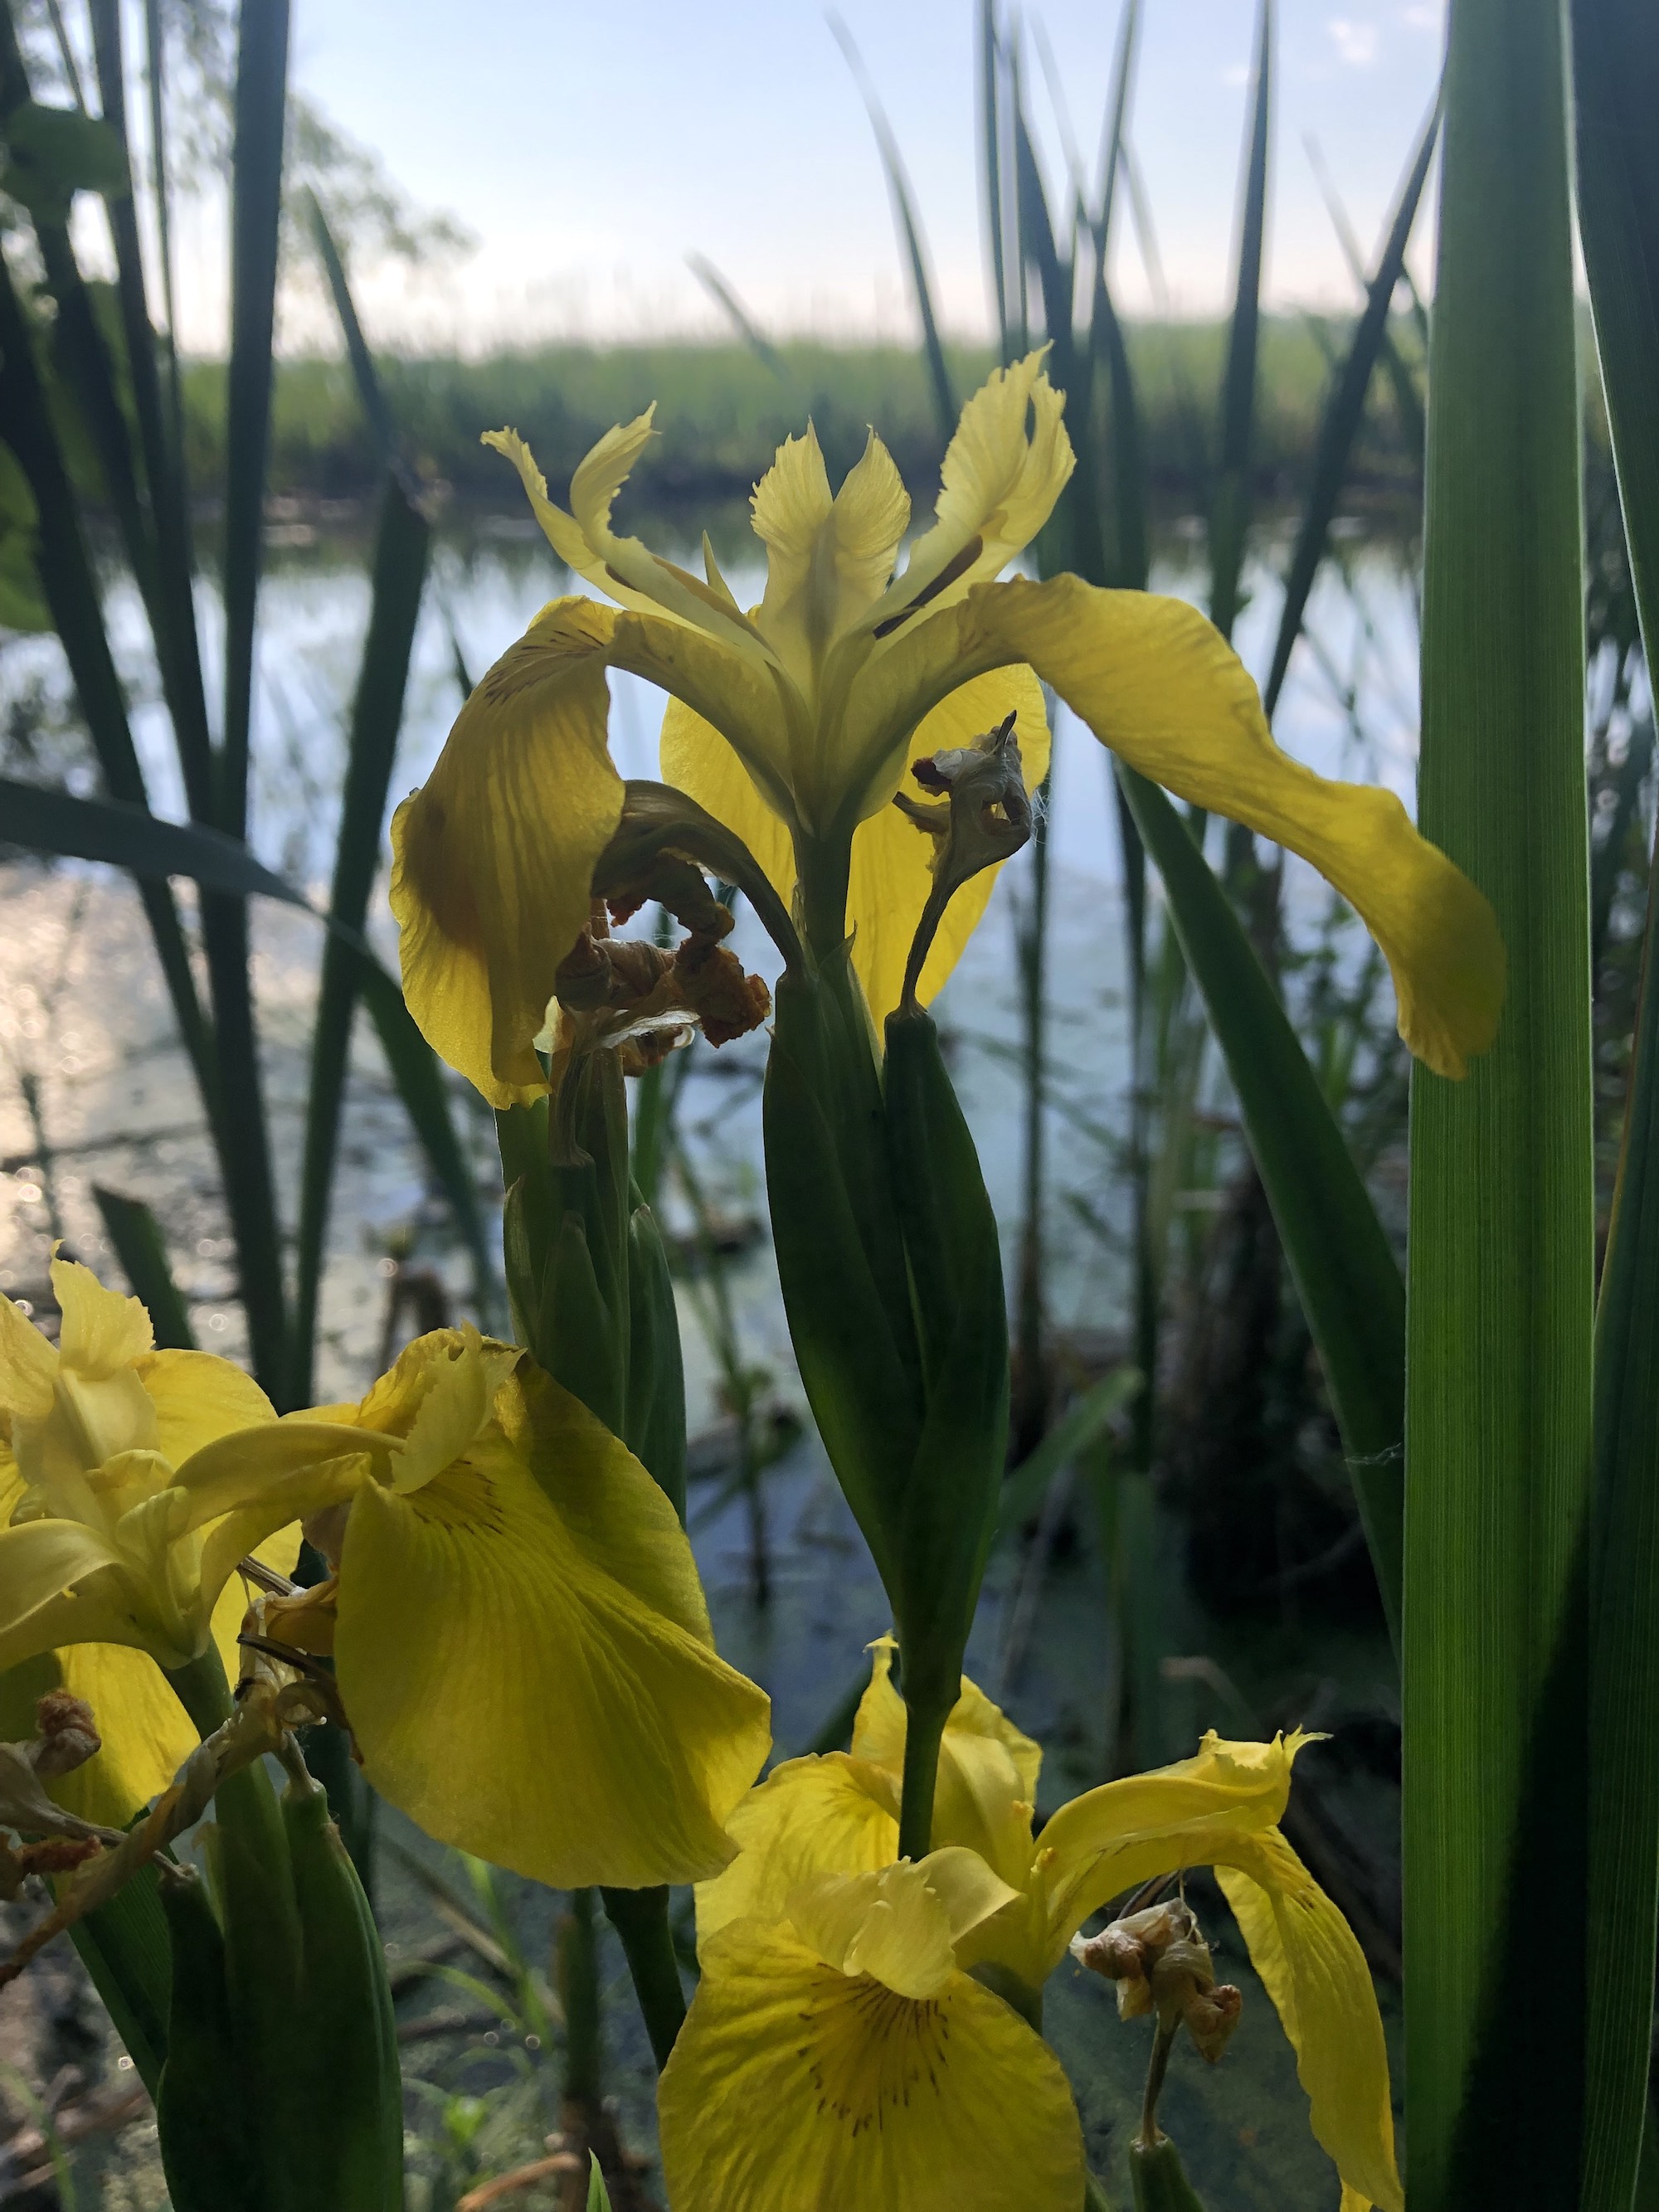 Yellow Flag Iris by Cattails on Lake Wingra on June 6, 2021.